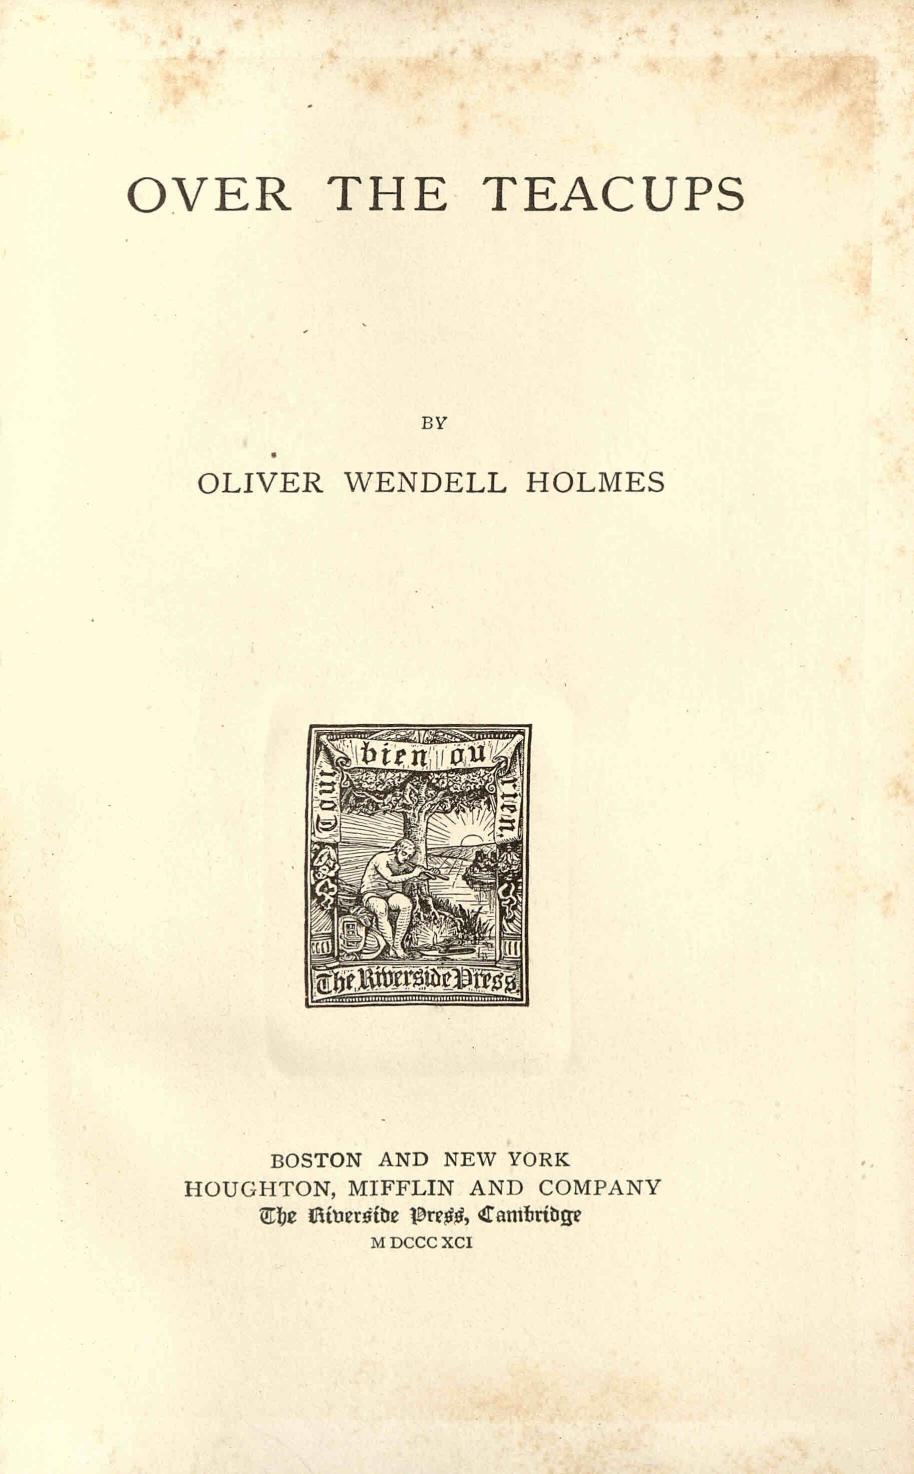  1891 - Over the Tea Cups - Oliver Wendell Holmes